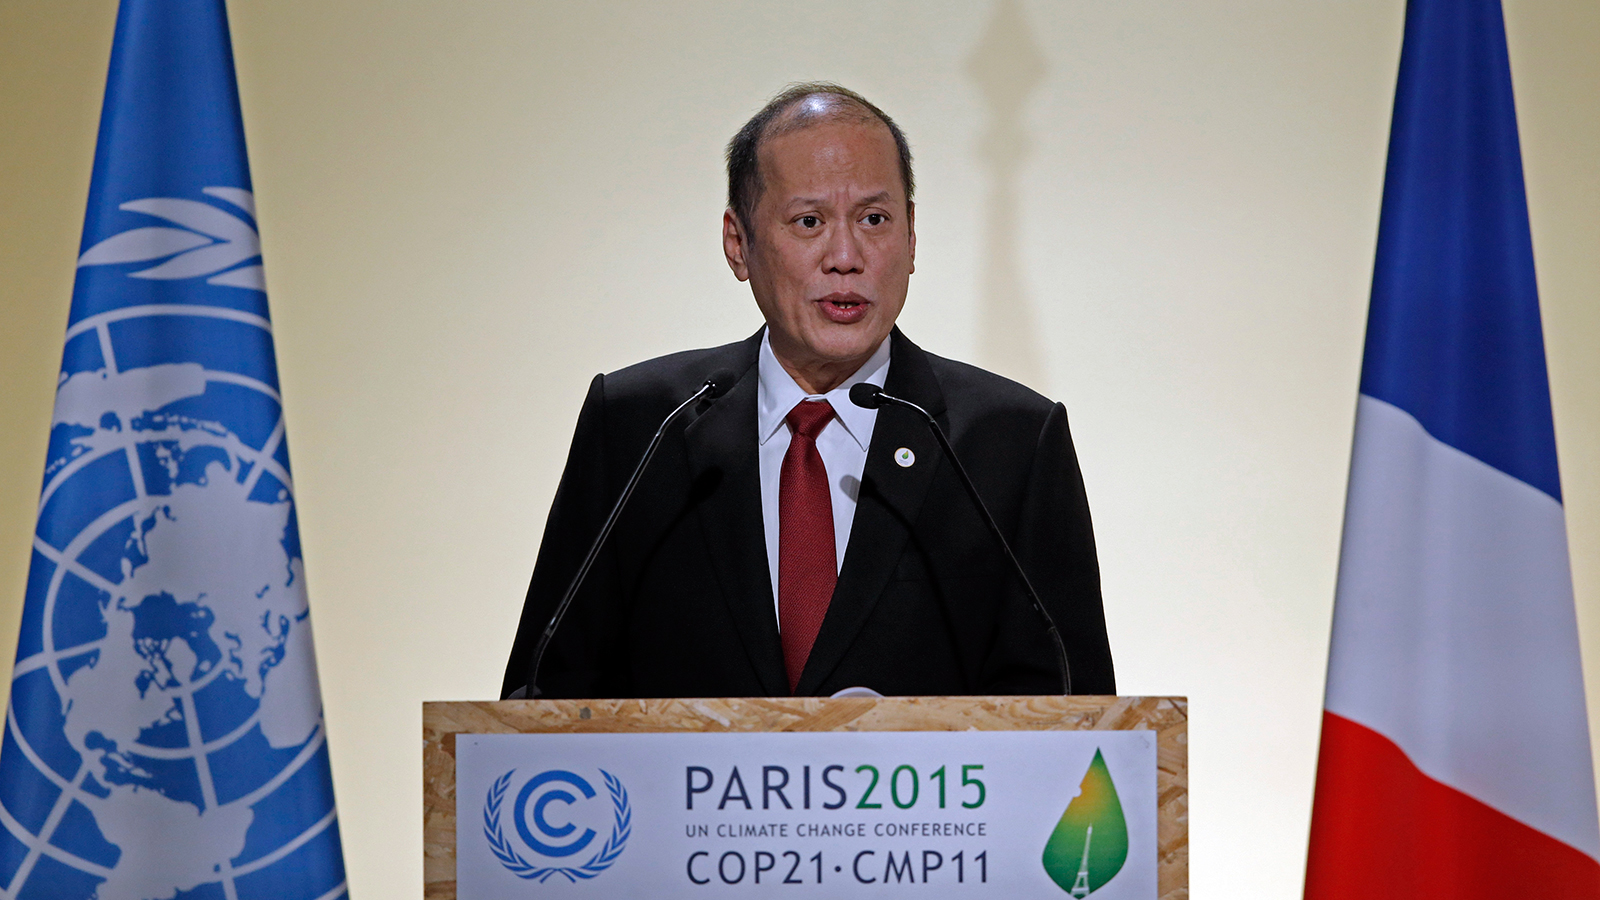 Philippine's President Benigno Aquino delivers a speech during the opening session of the World Climate Change Conference 2015 (COP21) at Le Bourget, near Paris, France, November 30, 2015.